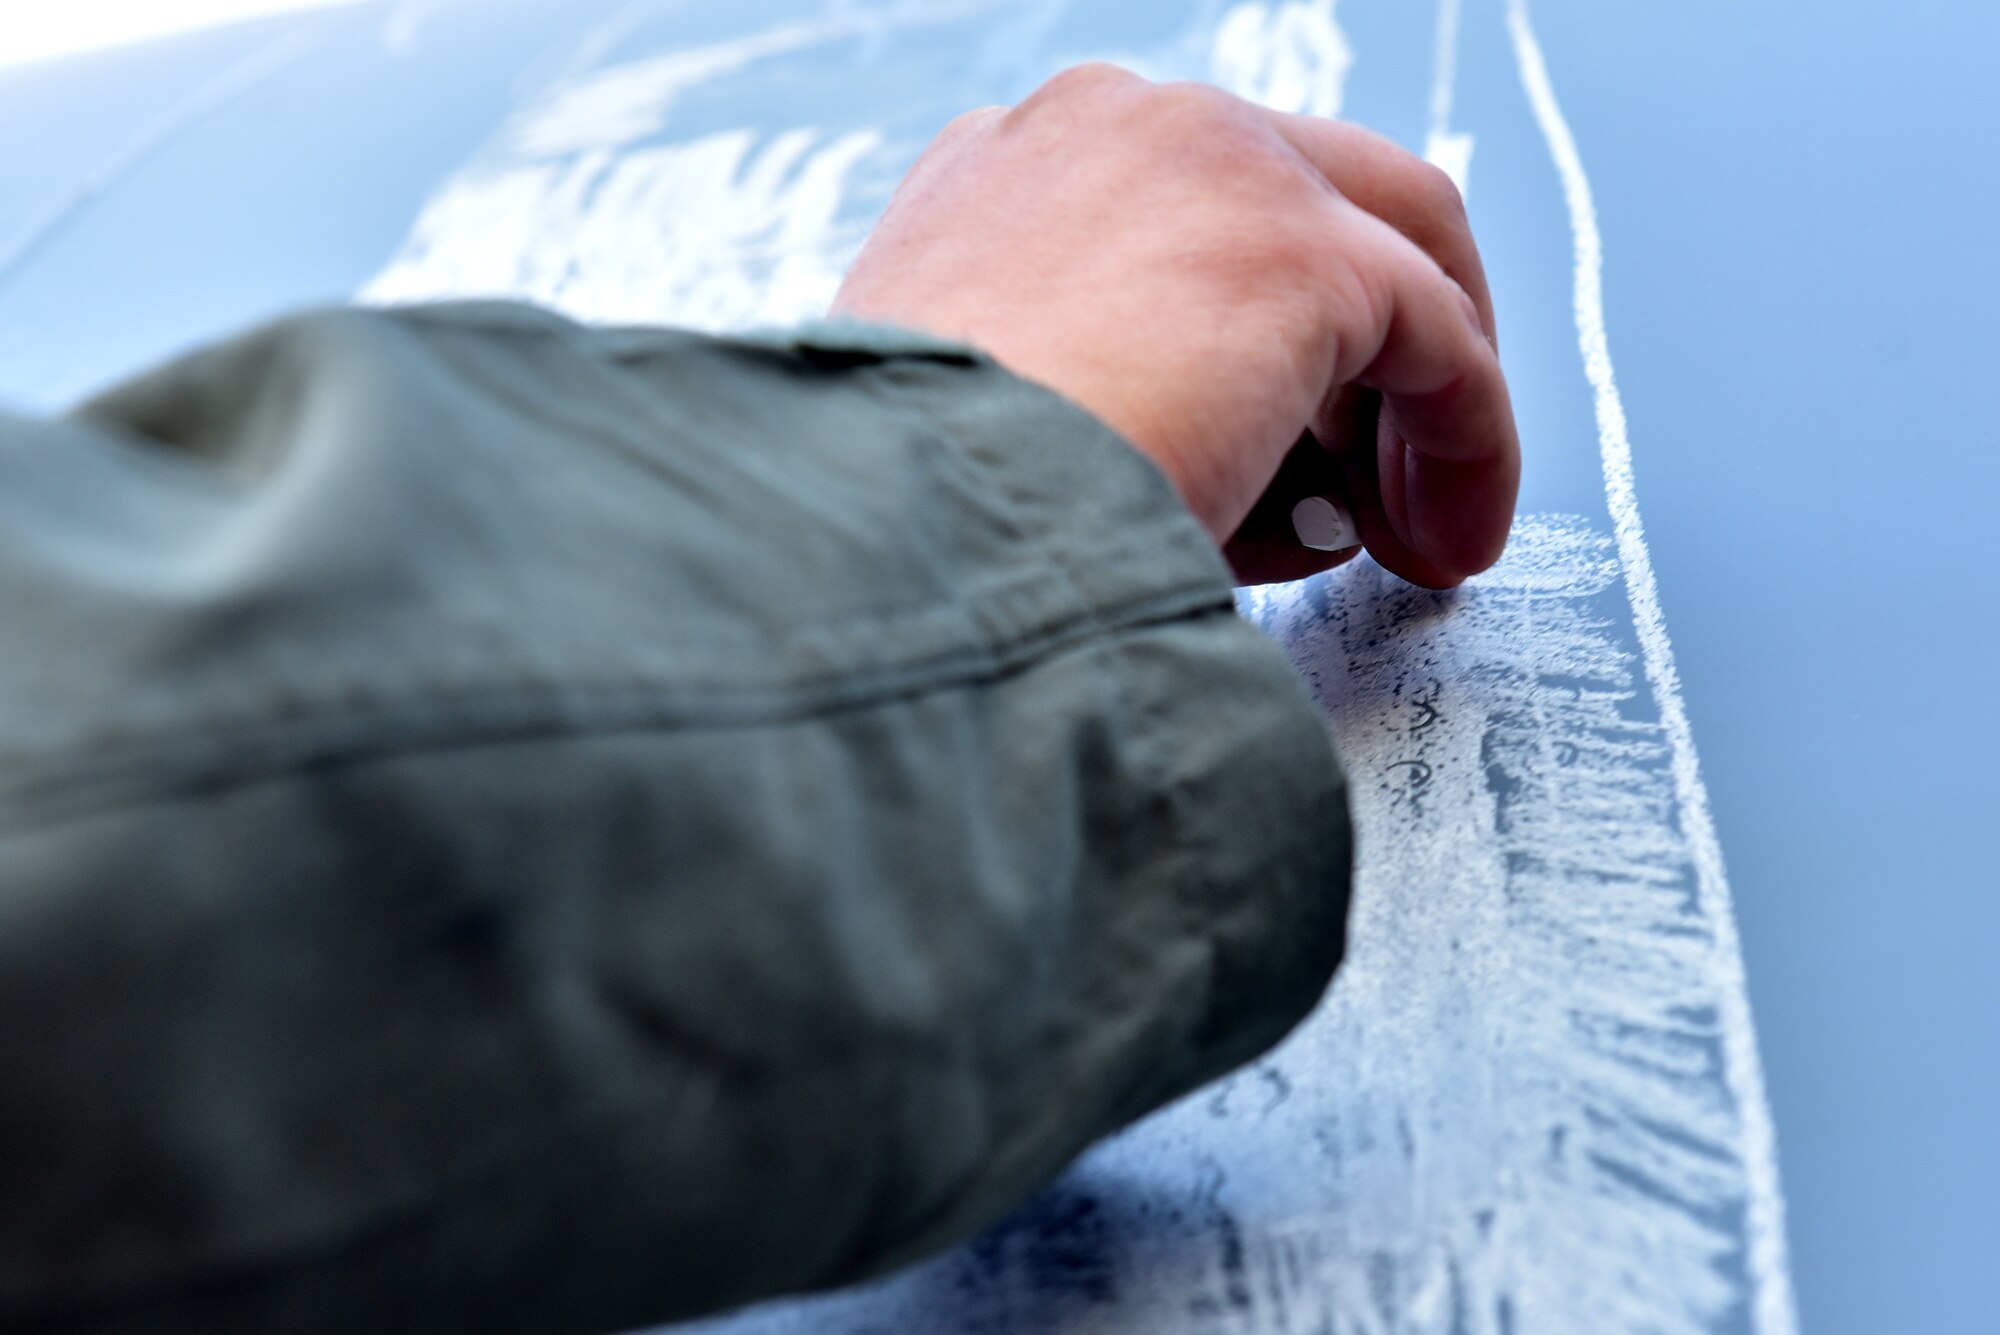 An Airman draws with chalk on the side of a C-130J